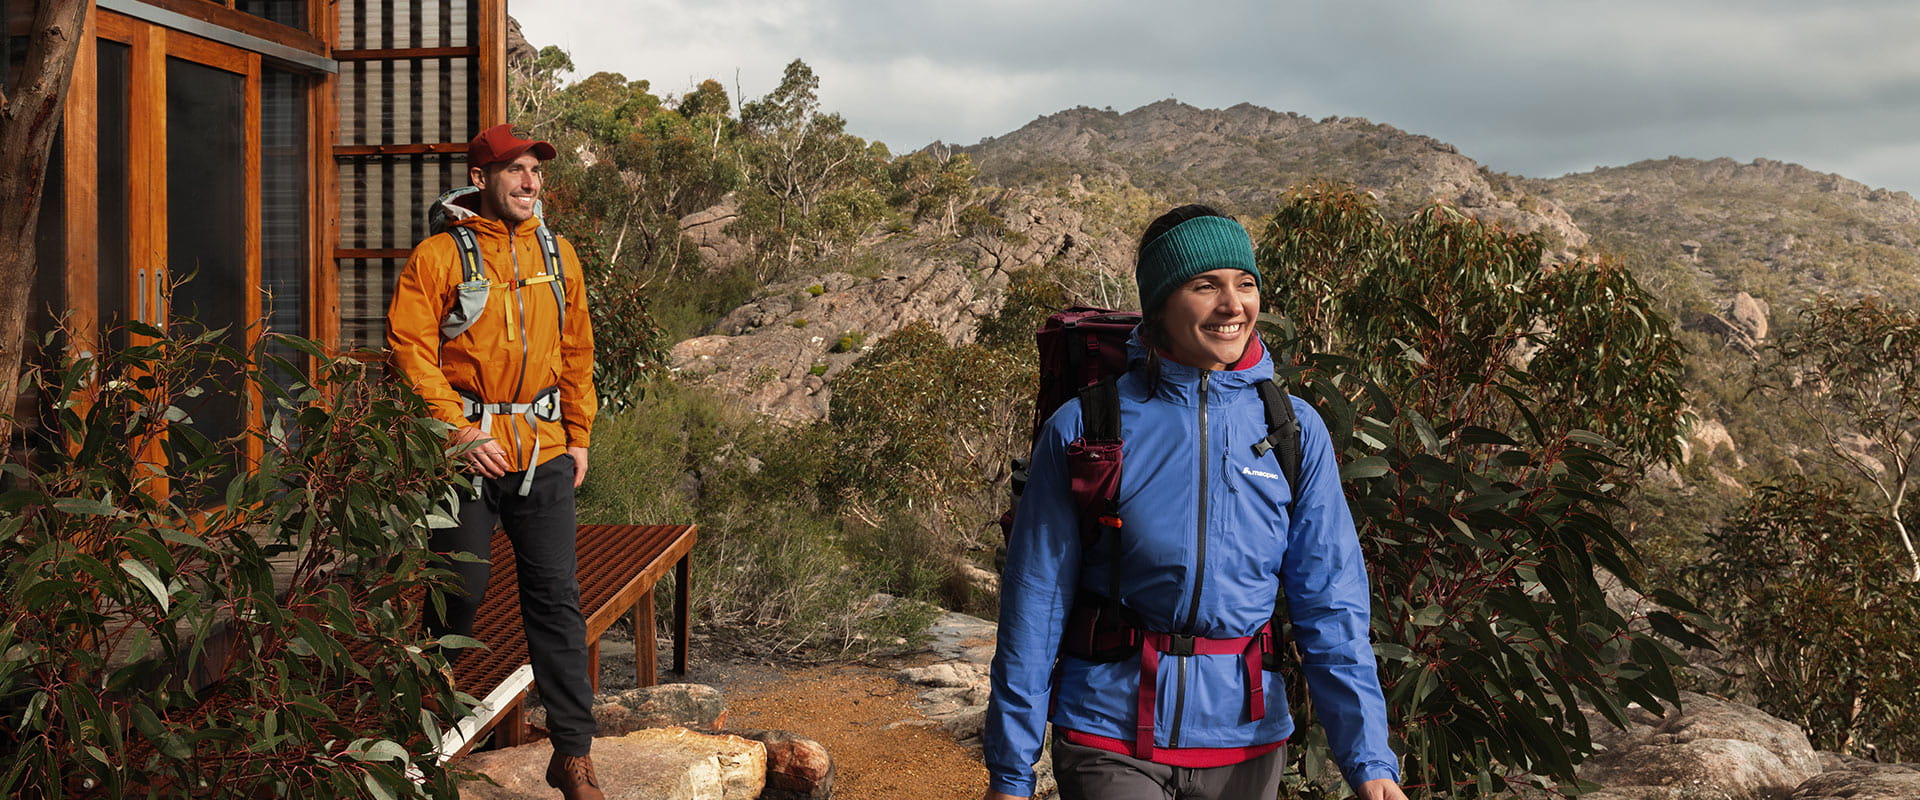 Two hikers depart their cabin surrounded by mountainous views